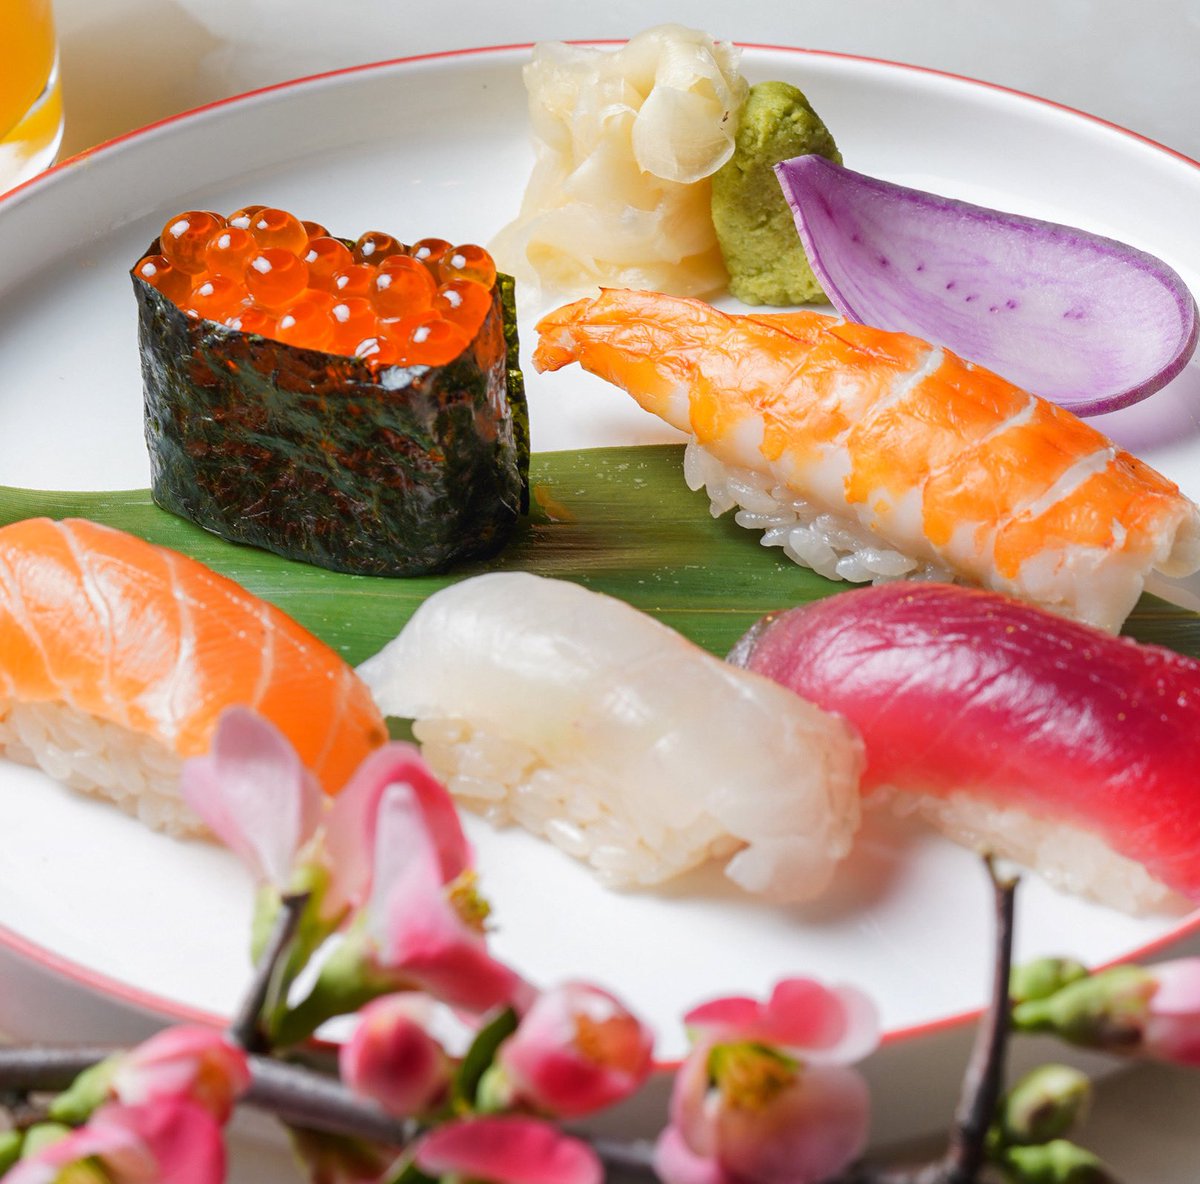 Lighter evenings, fresh flavors – spring is in the air at Nobu. [Link in bio]